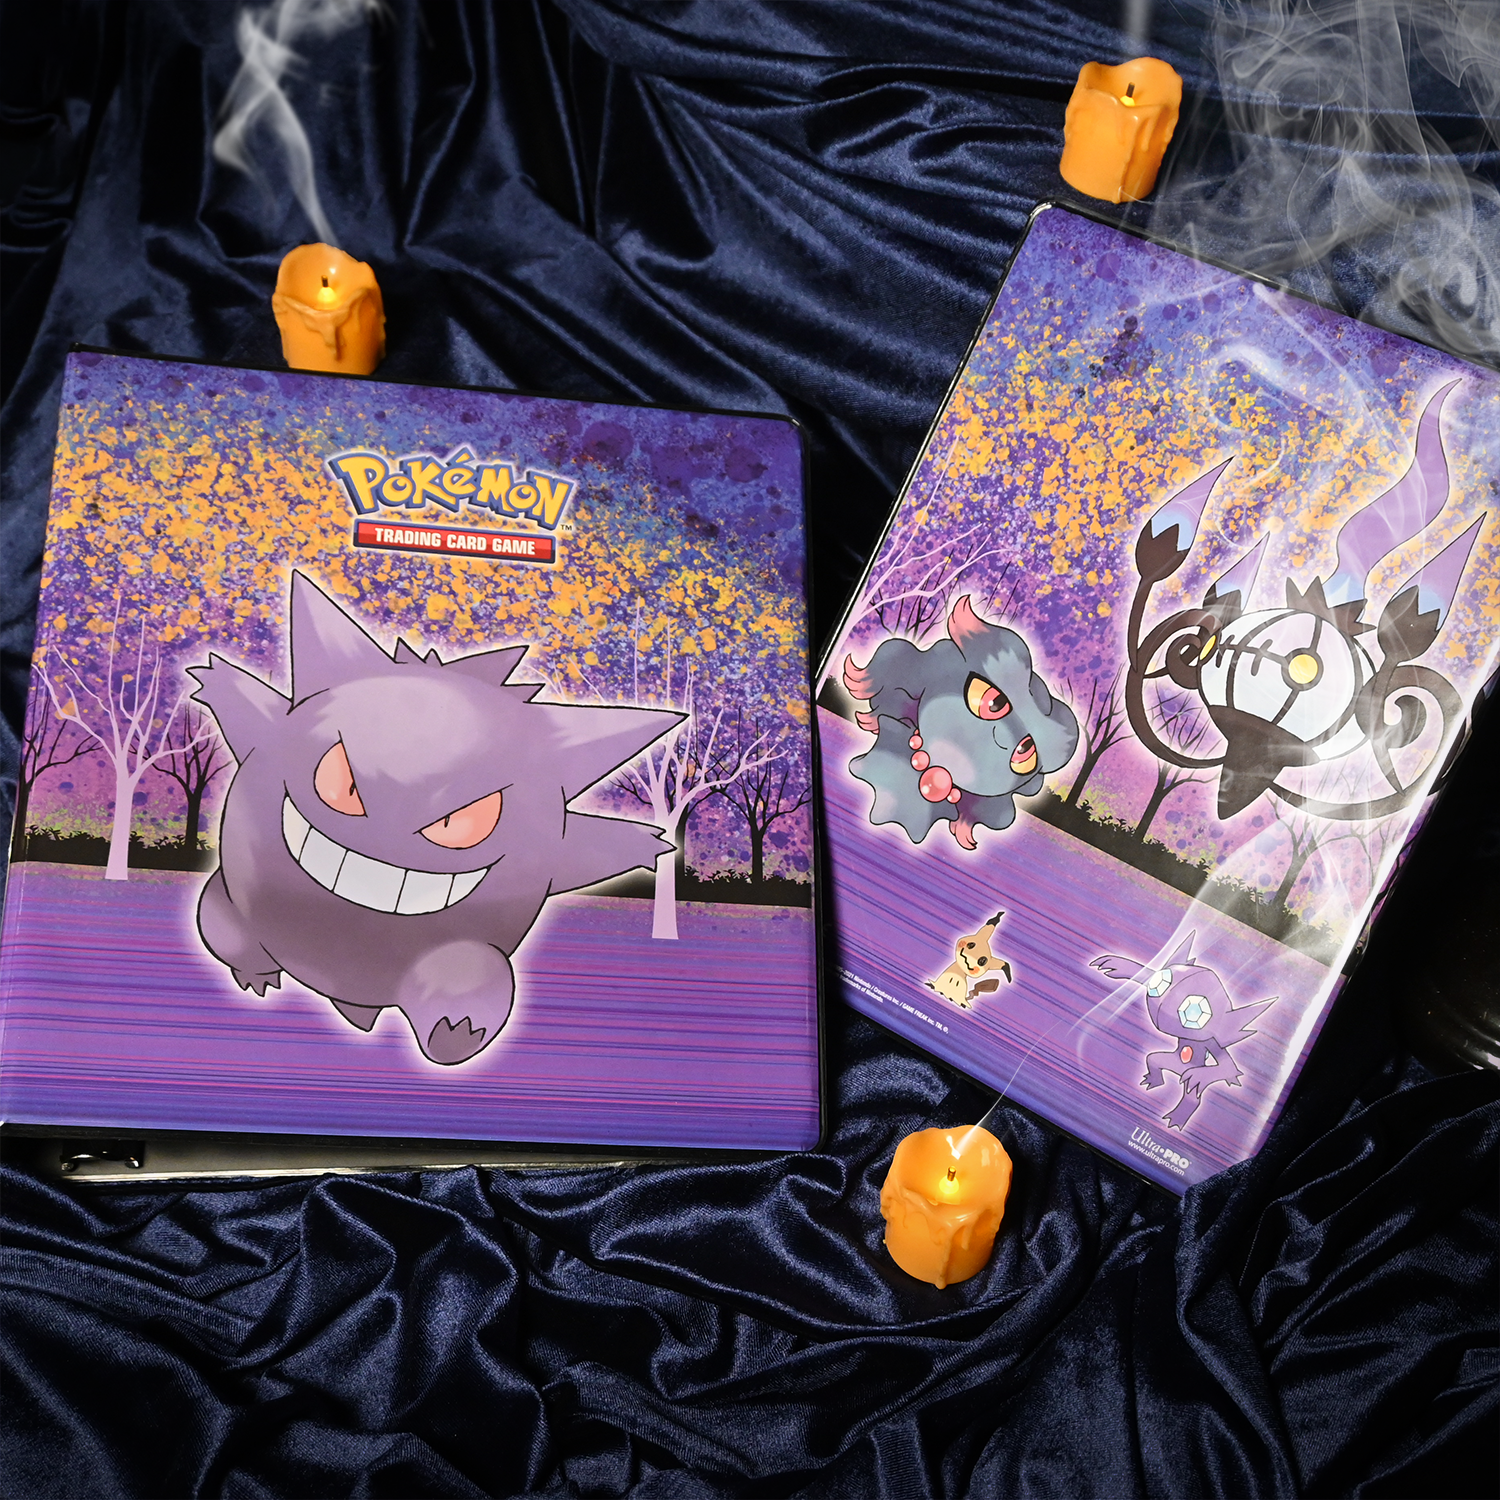 UPcoming from Ultra PRO: Haunted Hollow for Pokémon